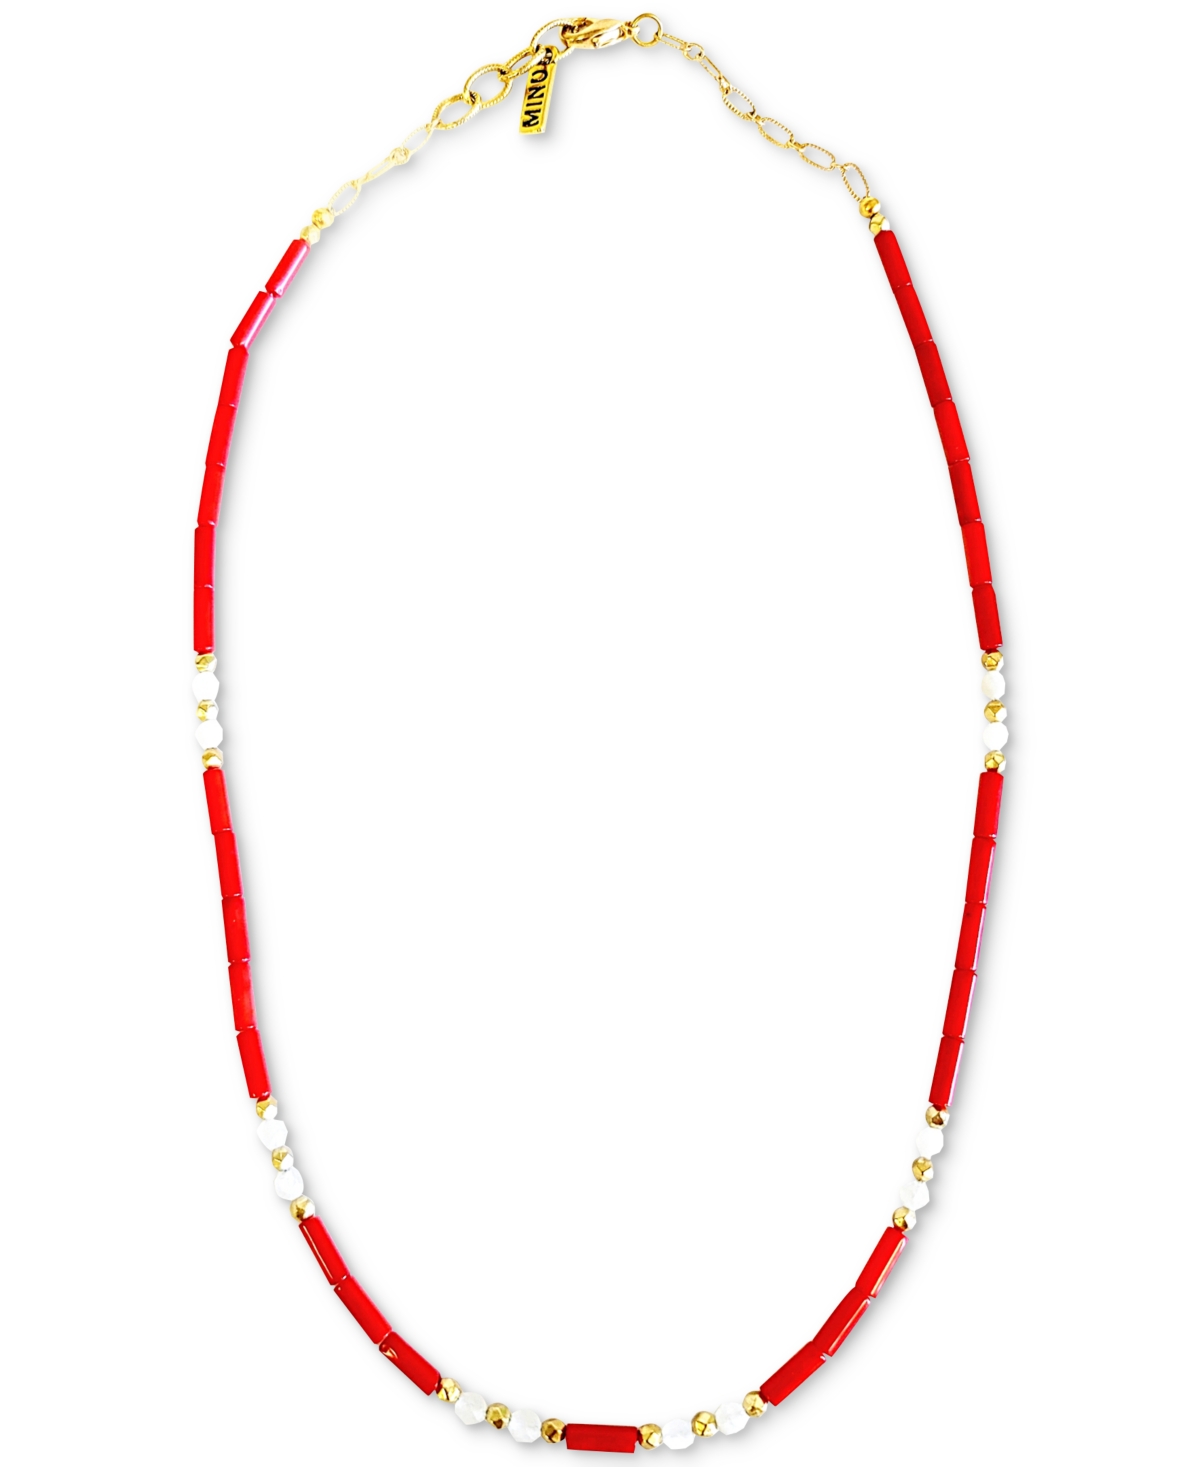 Gold-Tone Red Stone & Moonstone Statement Necklace, 16" + 2" extender - Red White